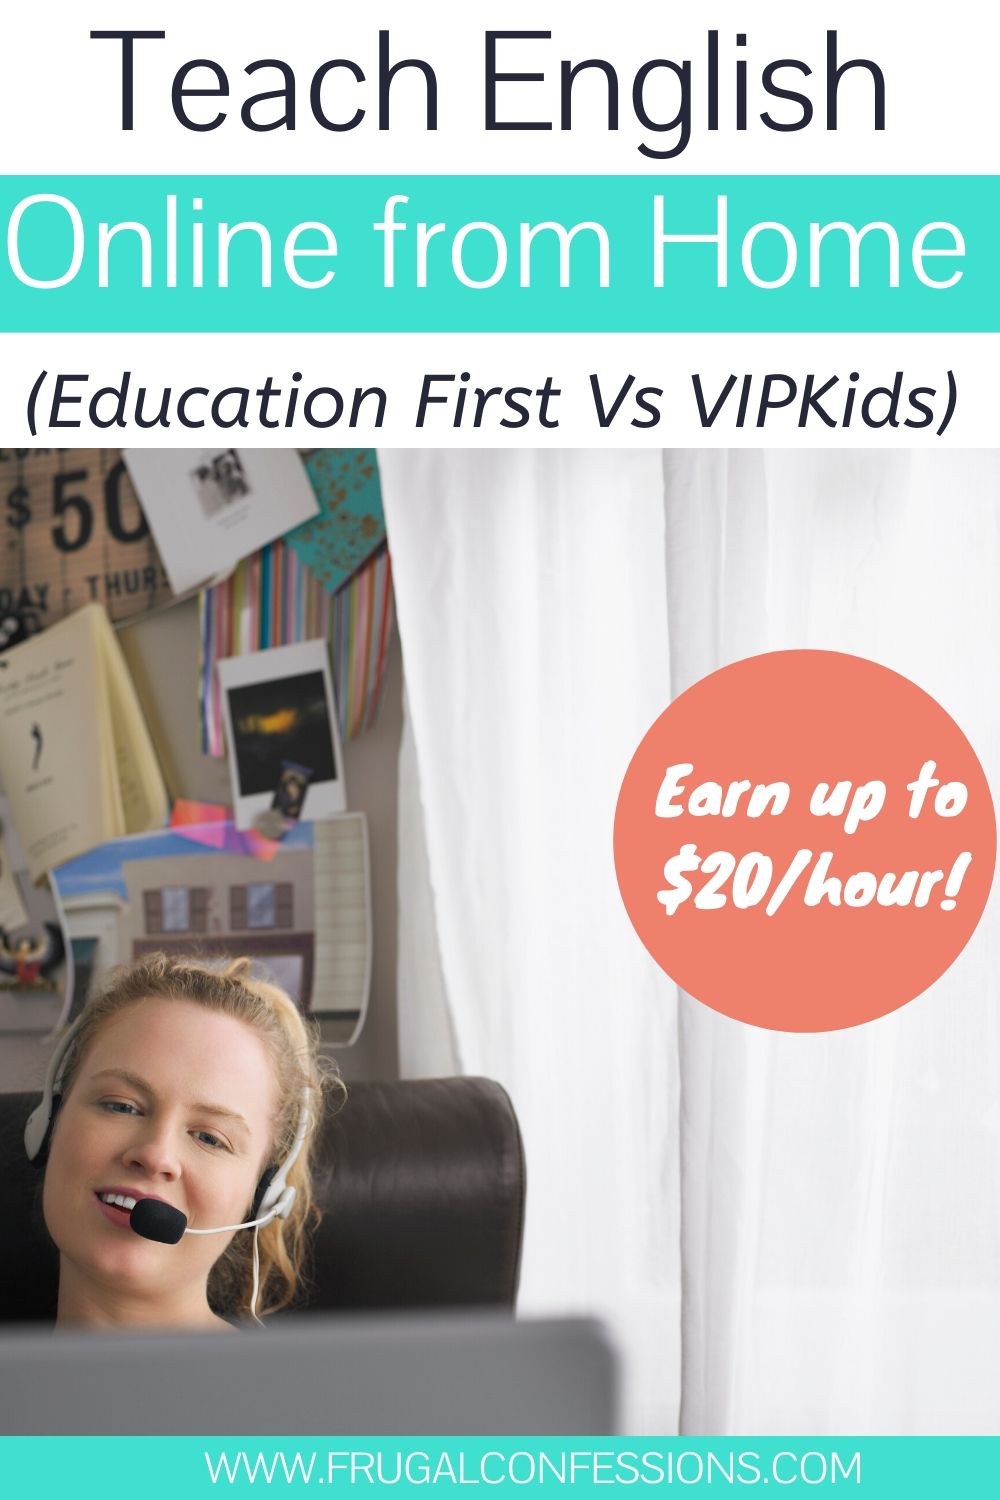 Teach English Online with Education First (Alternative to VIPKids)